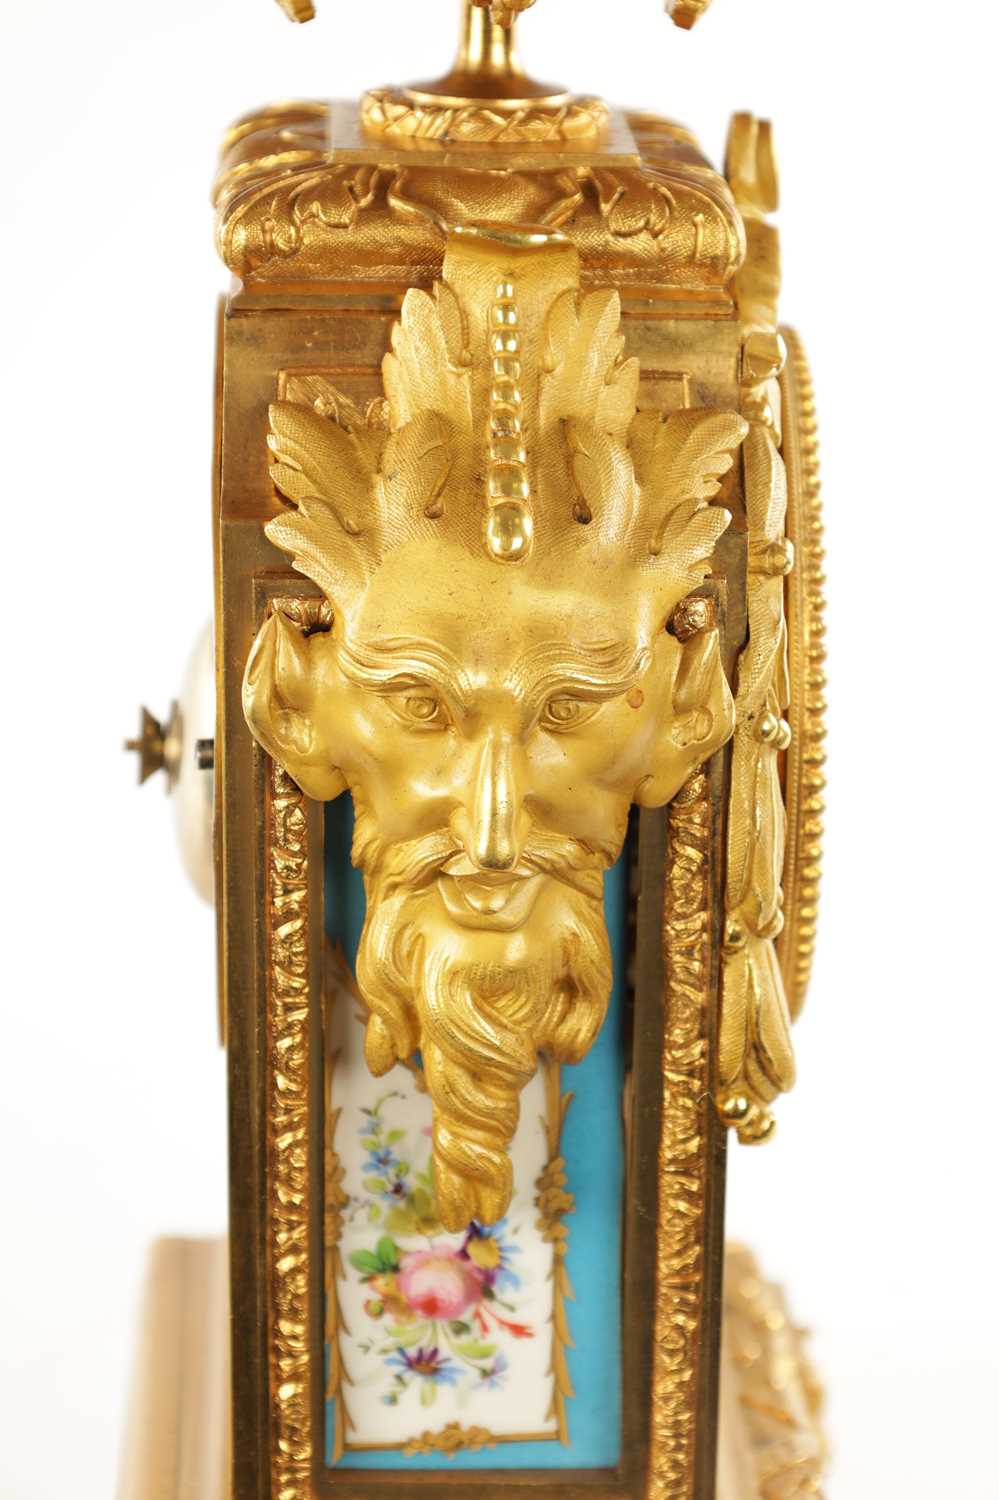 A LATE 19TH CENTURY FRENCH PORCELAIN PANELLED ORMOLU MANTEL CLOCK - Image 9 of 10